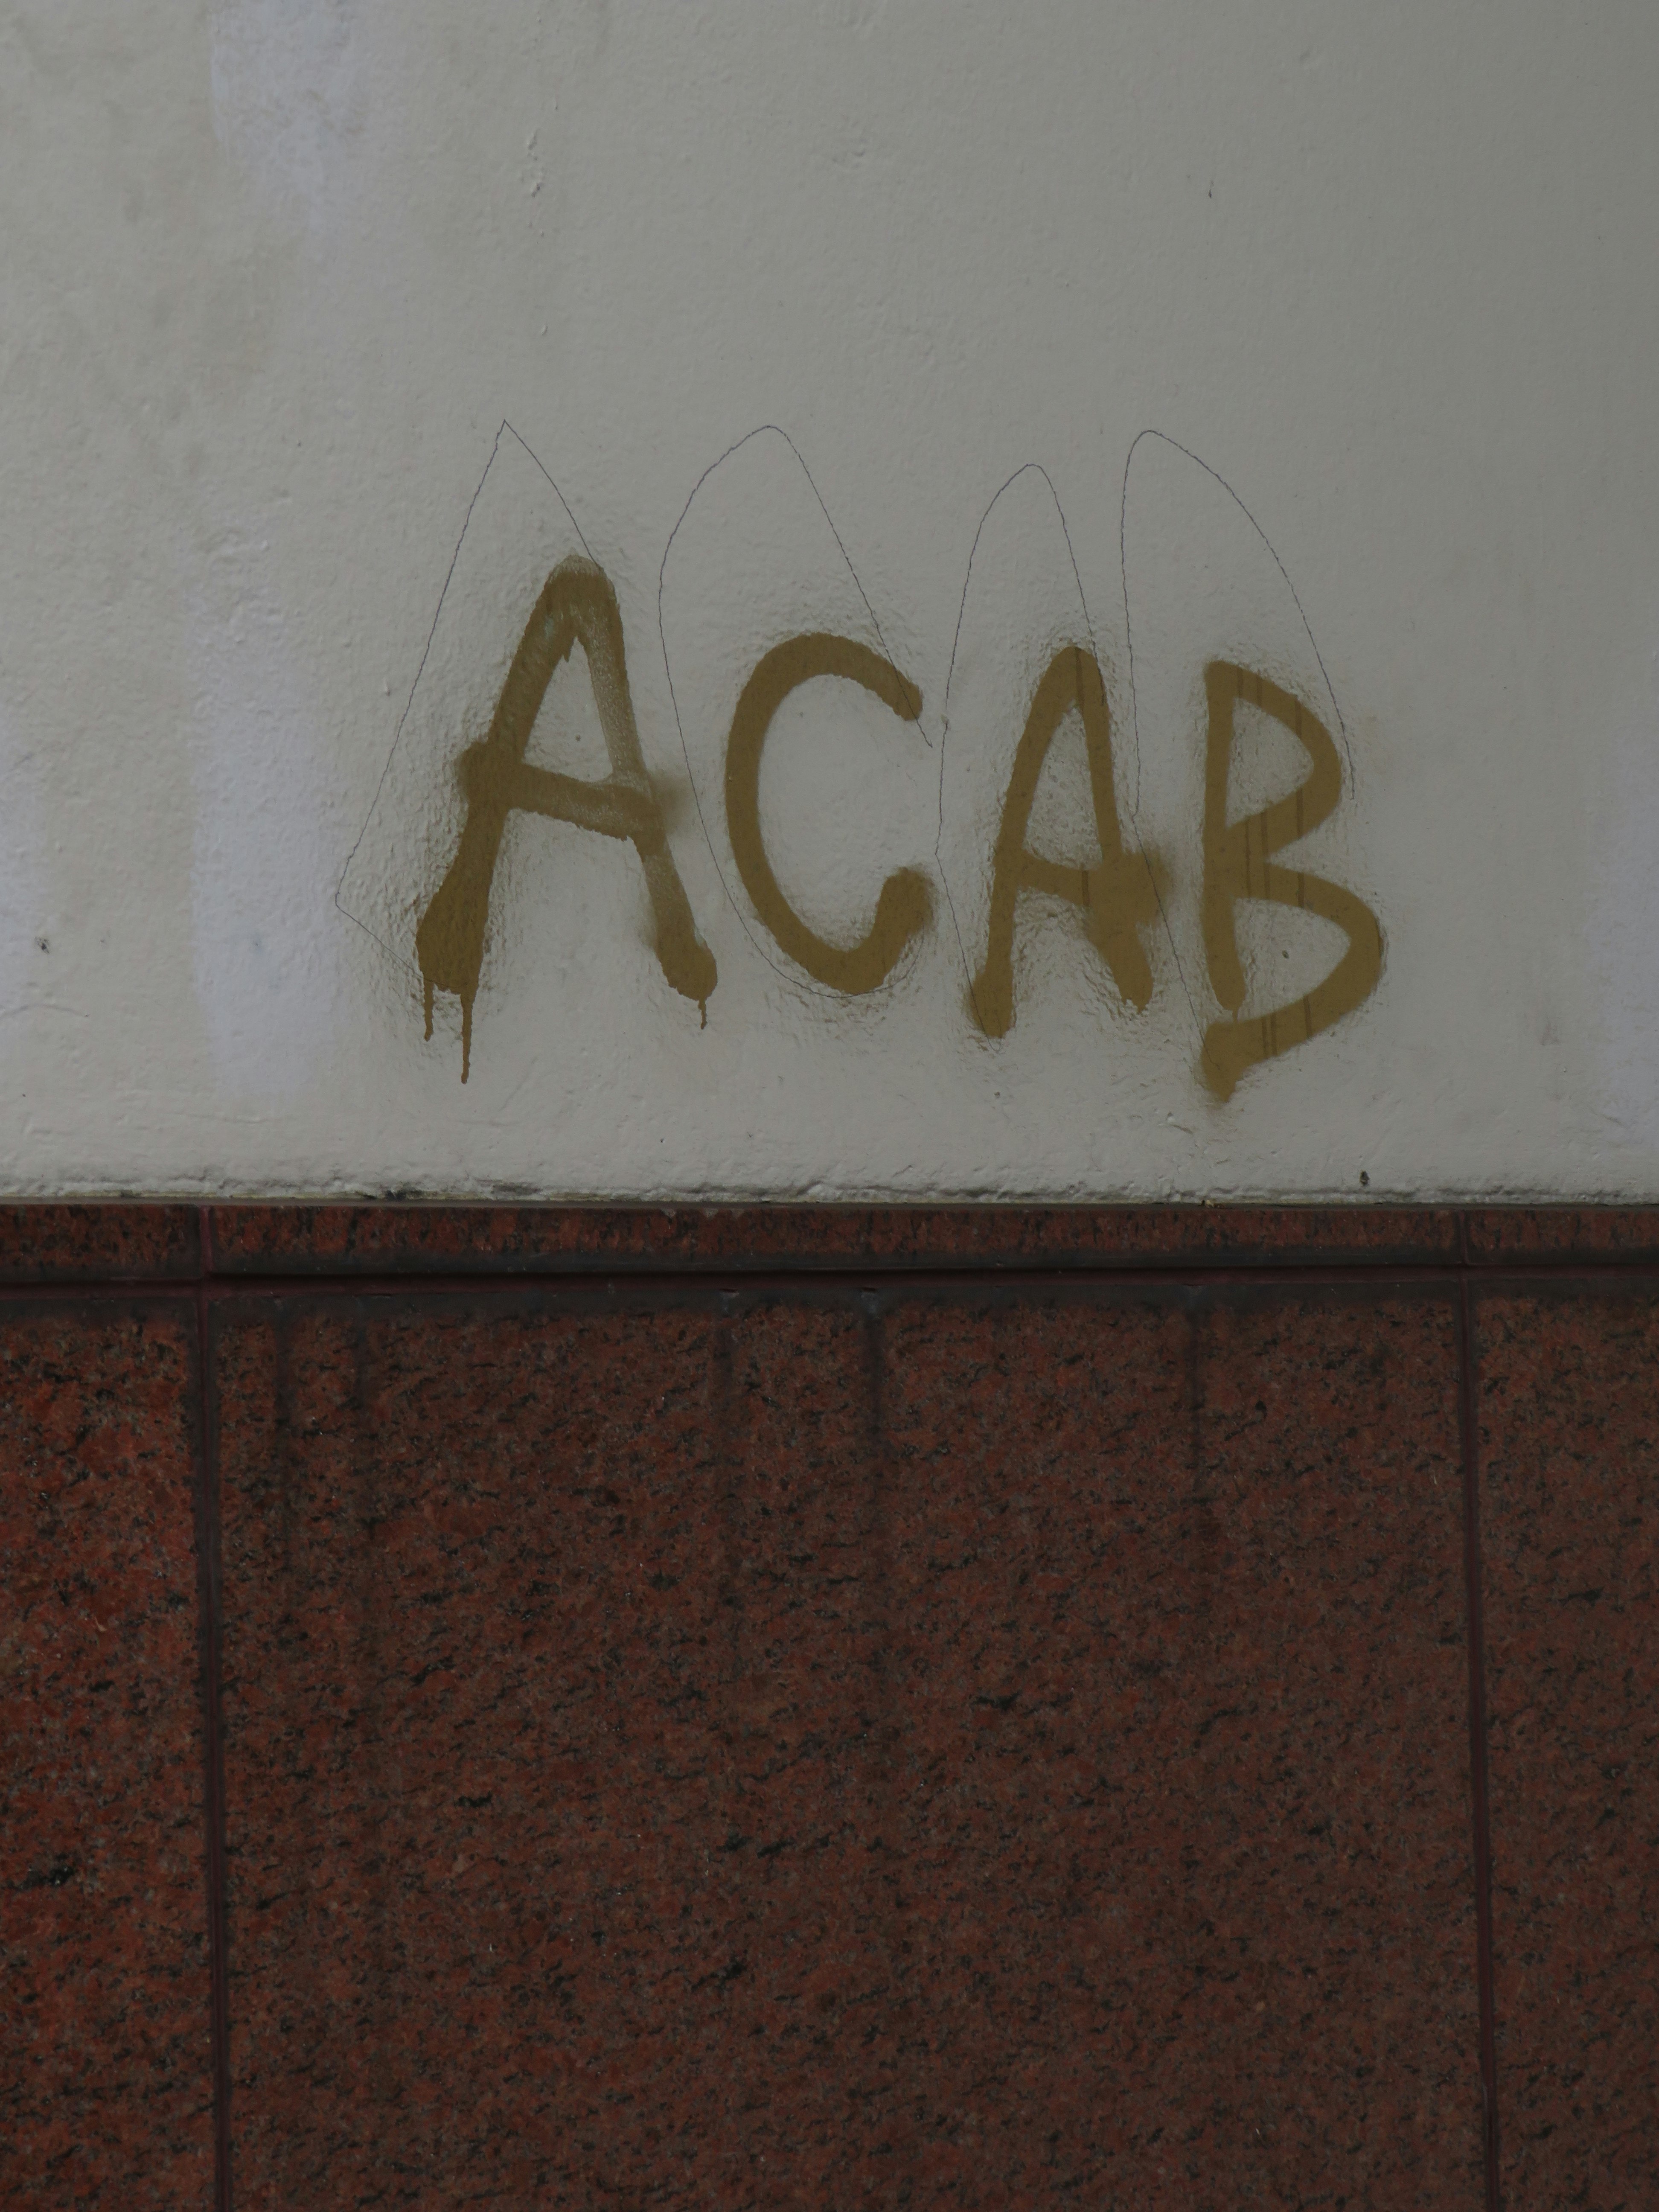 ACAB "All Cops Are Bad/Bastards" spray-painted on the wall.